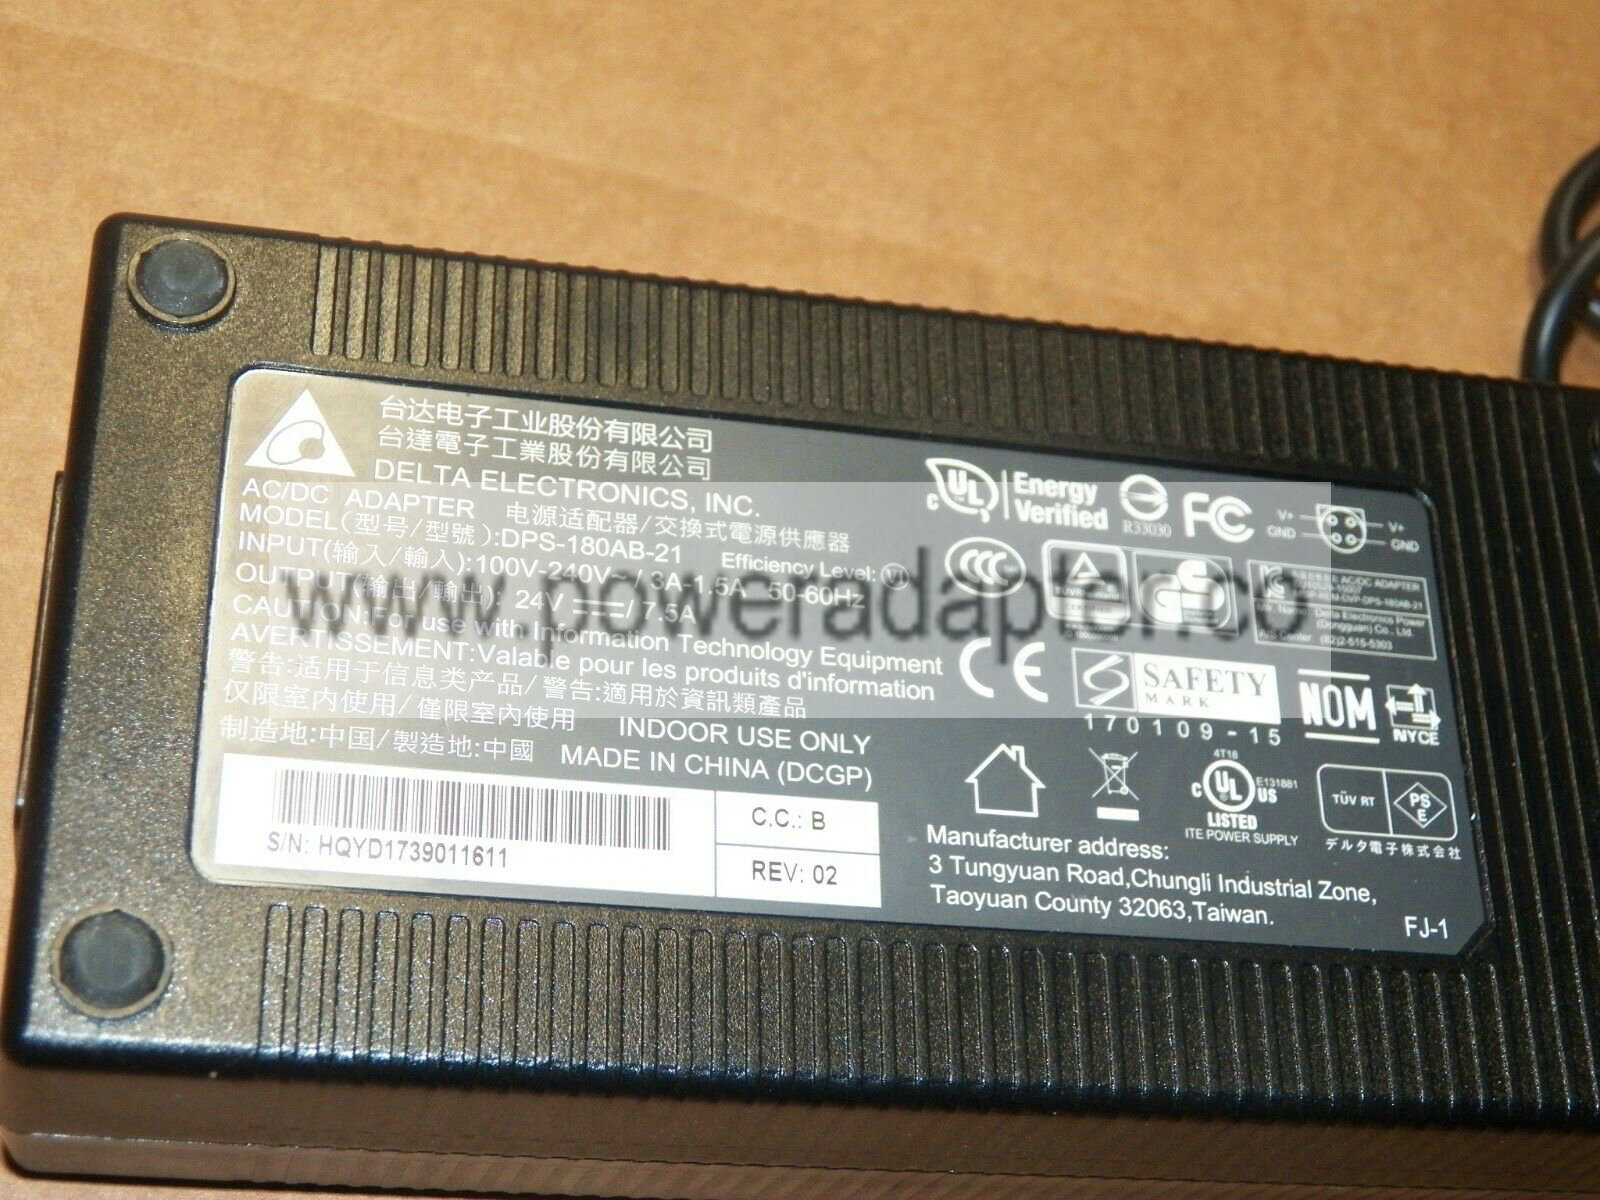 Delta Electronics DPS-180AB-21 24V 7.5A Power AC Adapter Max. Output Power: 180 W MPN: DPS-180AB-21 Output Voltage(s